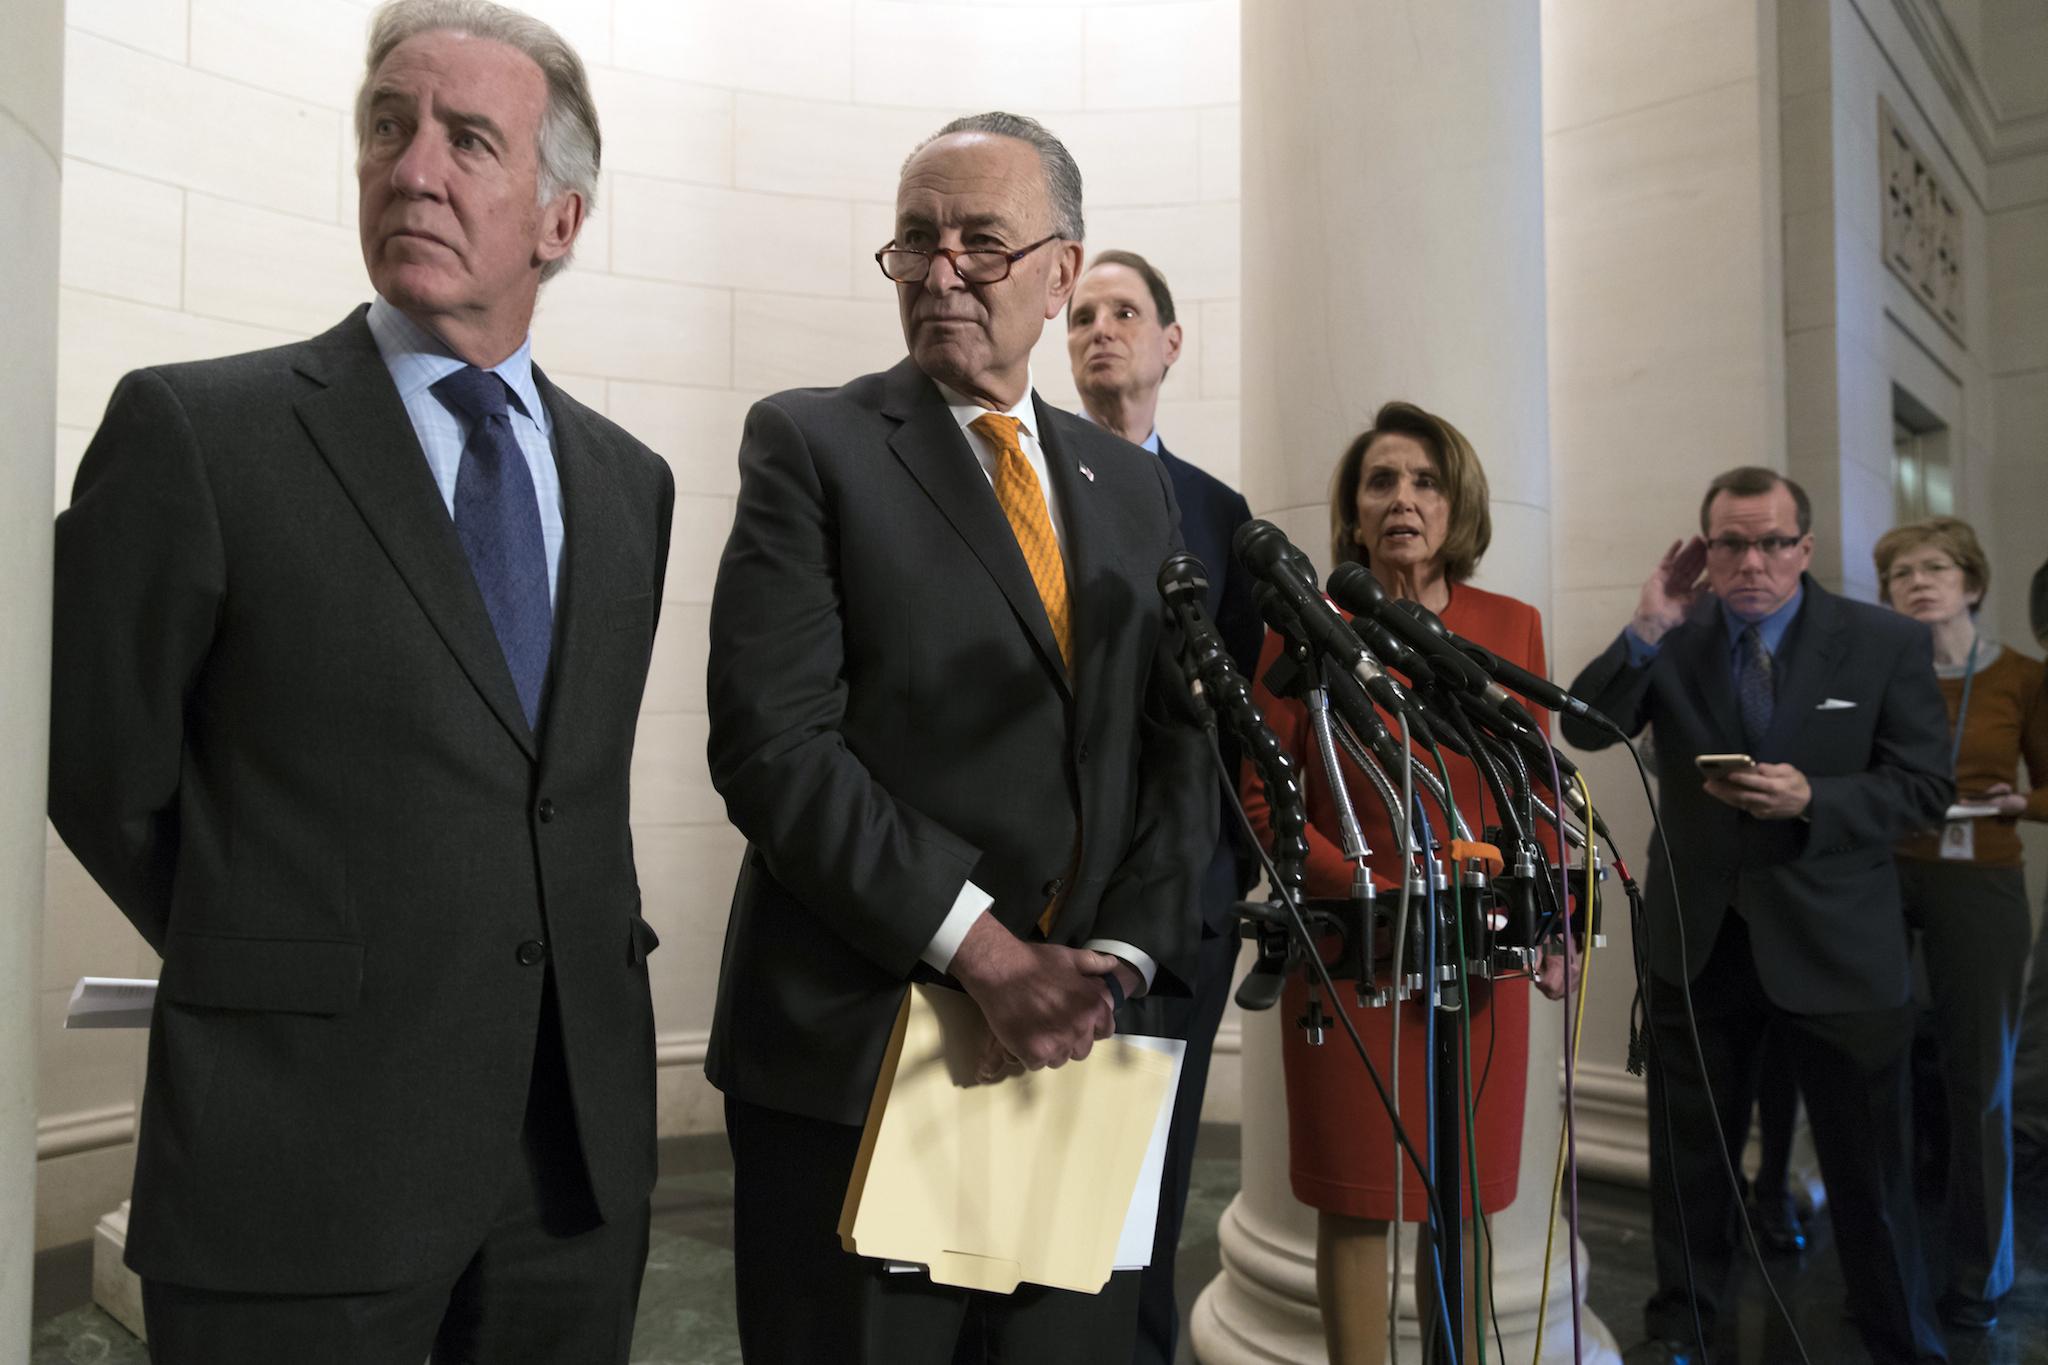 Top Democrats hold a news conference to criticise the Republican tax reform being debated in Congress (AP Photo/J. Scott Applewhite)